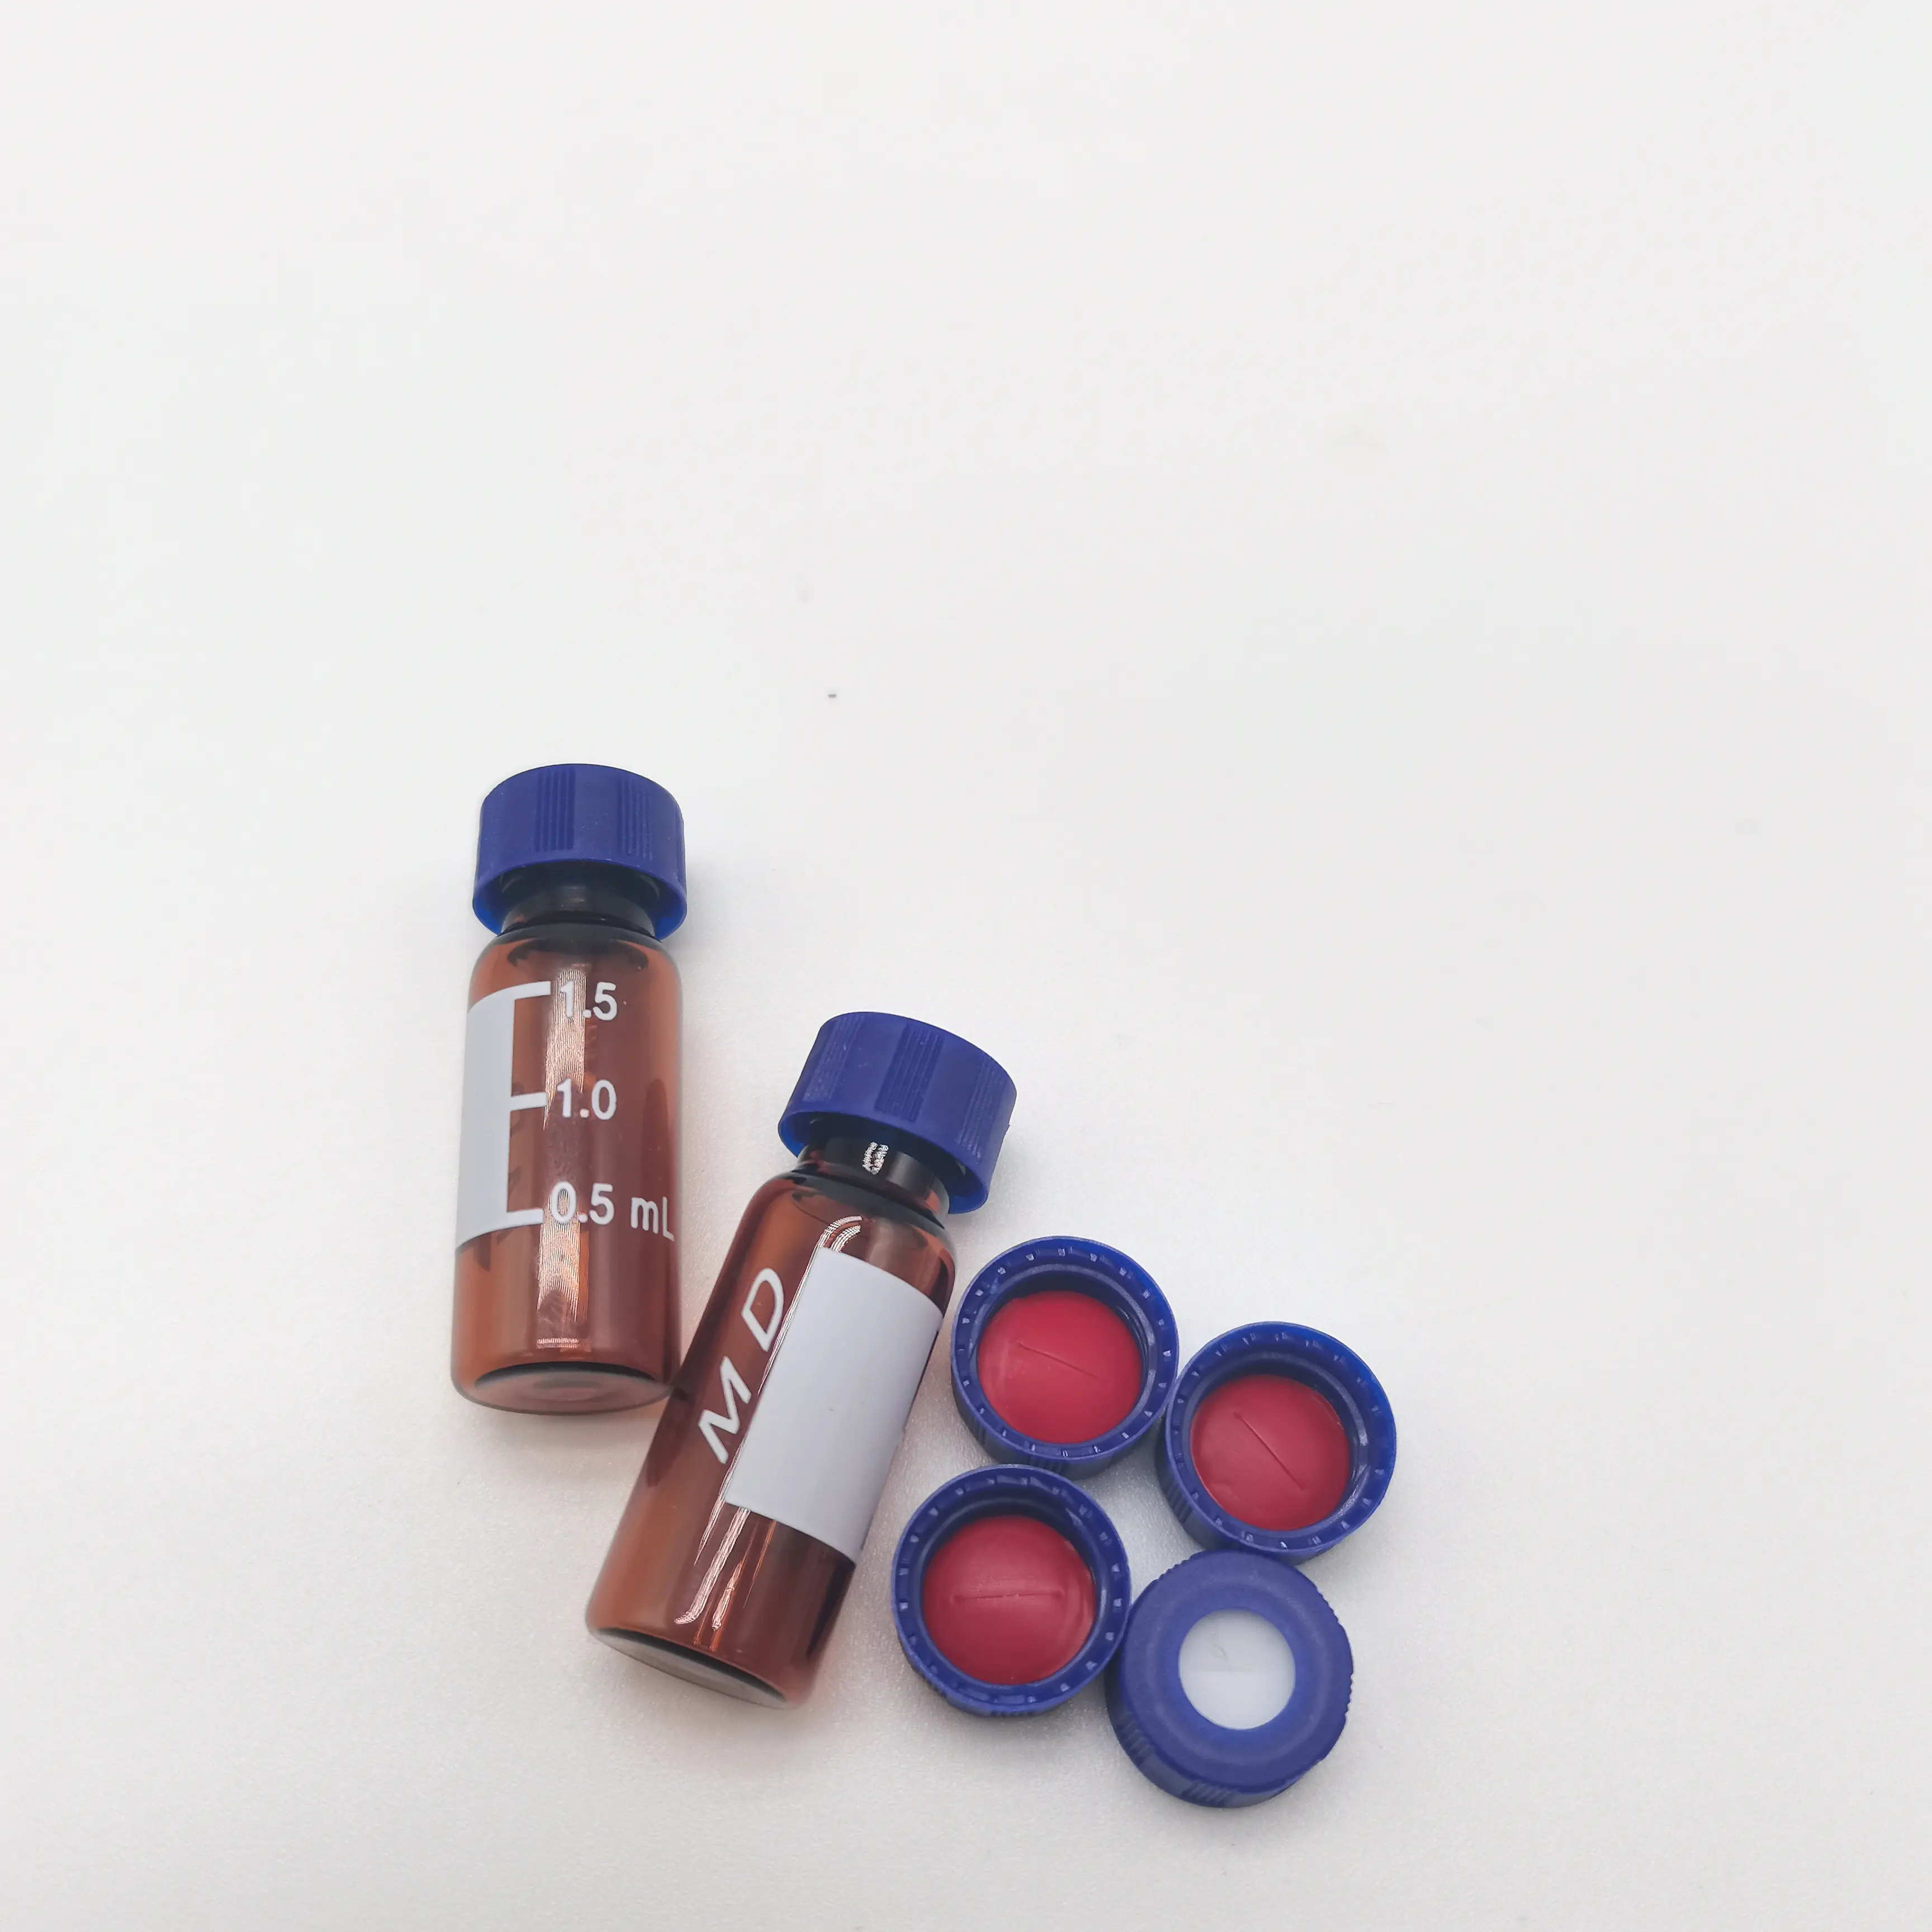 Homay packaging high quality 1.5ml glass vial with mark for laboratory hplc